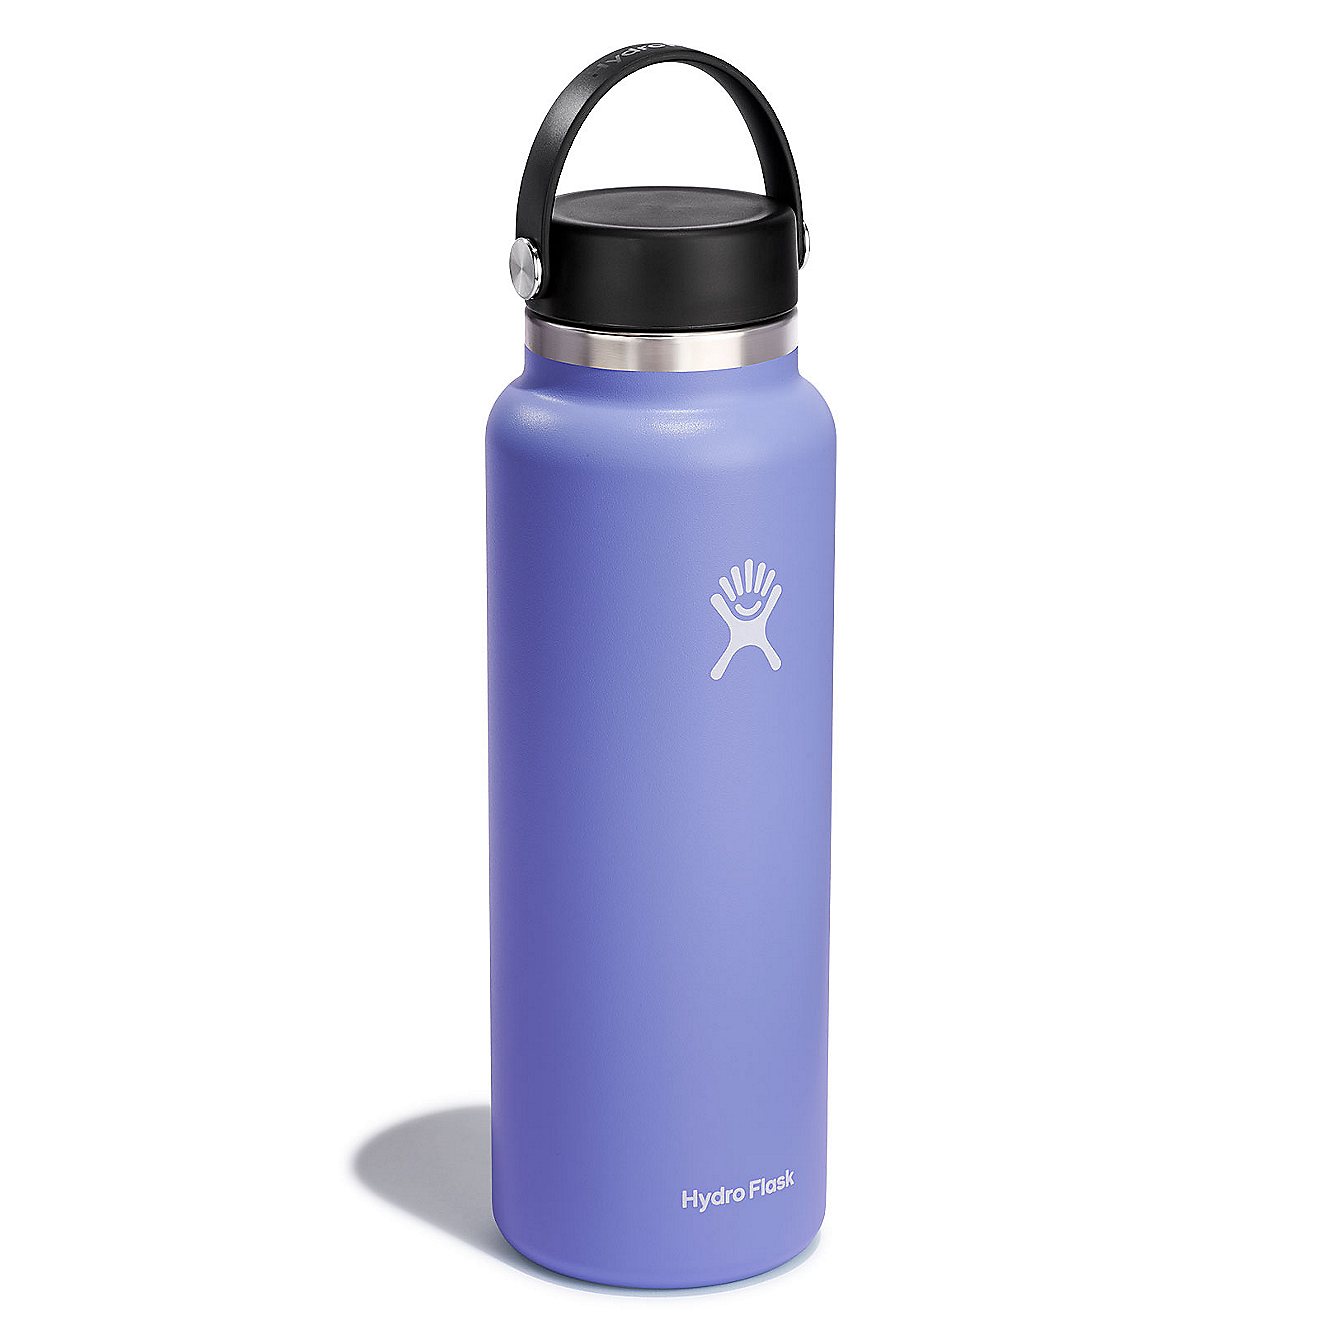 https://academy.scene7.com/is/image/academy///camping/drinkware/purple_hydro-flask-wide-mouth-2.0-40-oz-bottle-with-flex-cap_w40bts474/3eb432391047464fa03827c0ff2b4e0d?$pdp-mobile-gallery-ng$